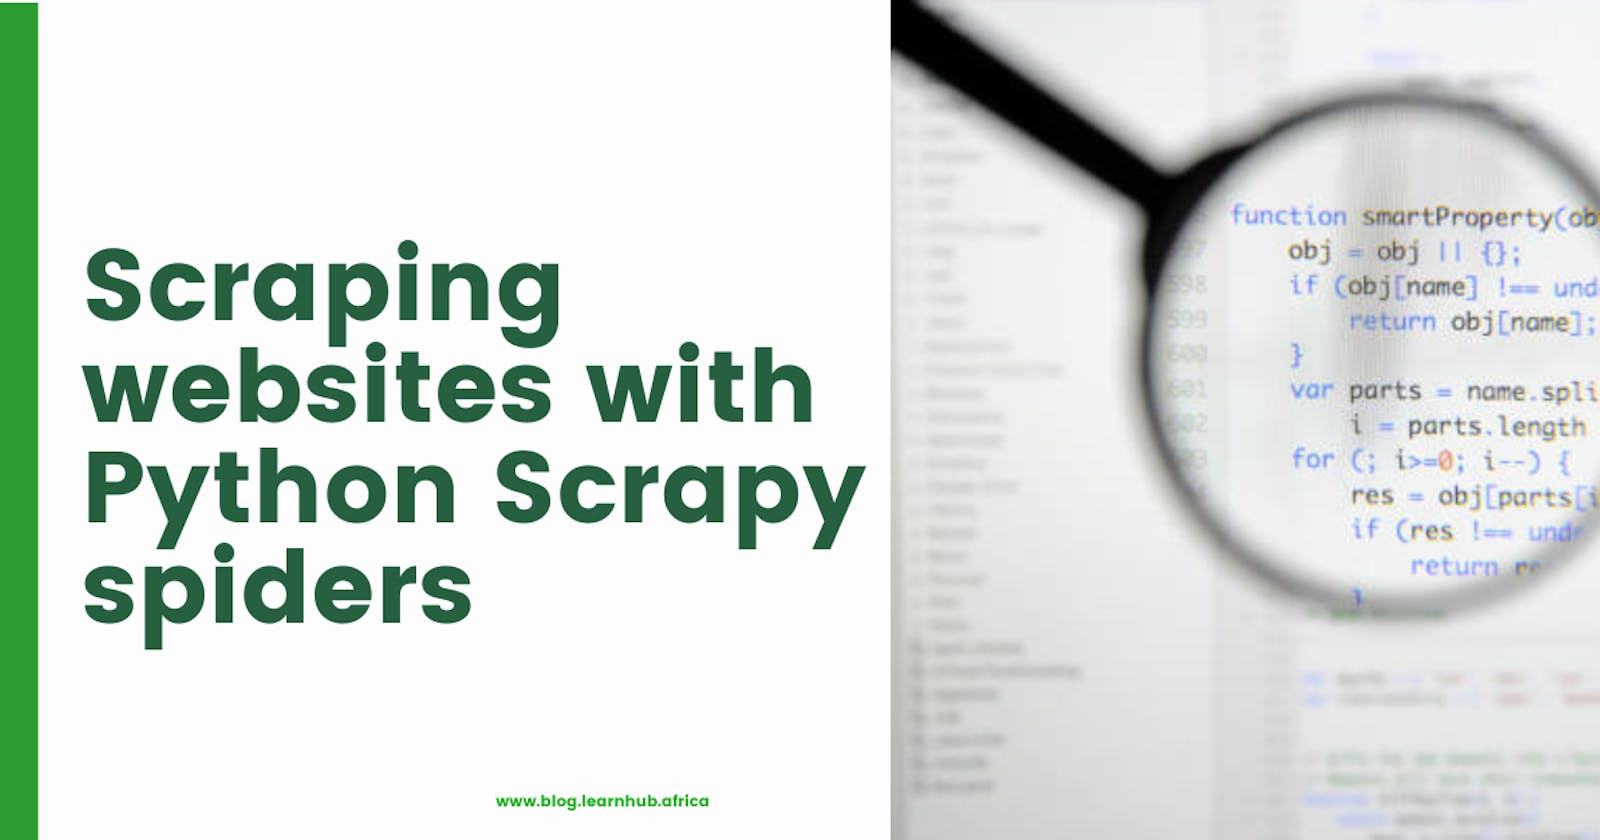 Scraping Websites With Python Scrapy Spiders